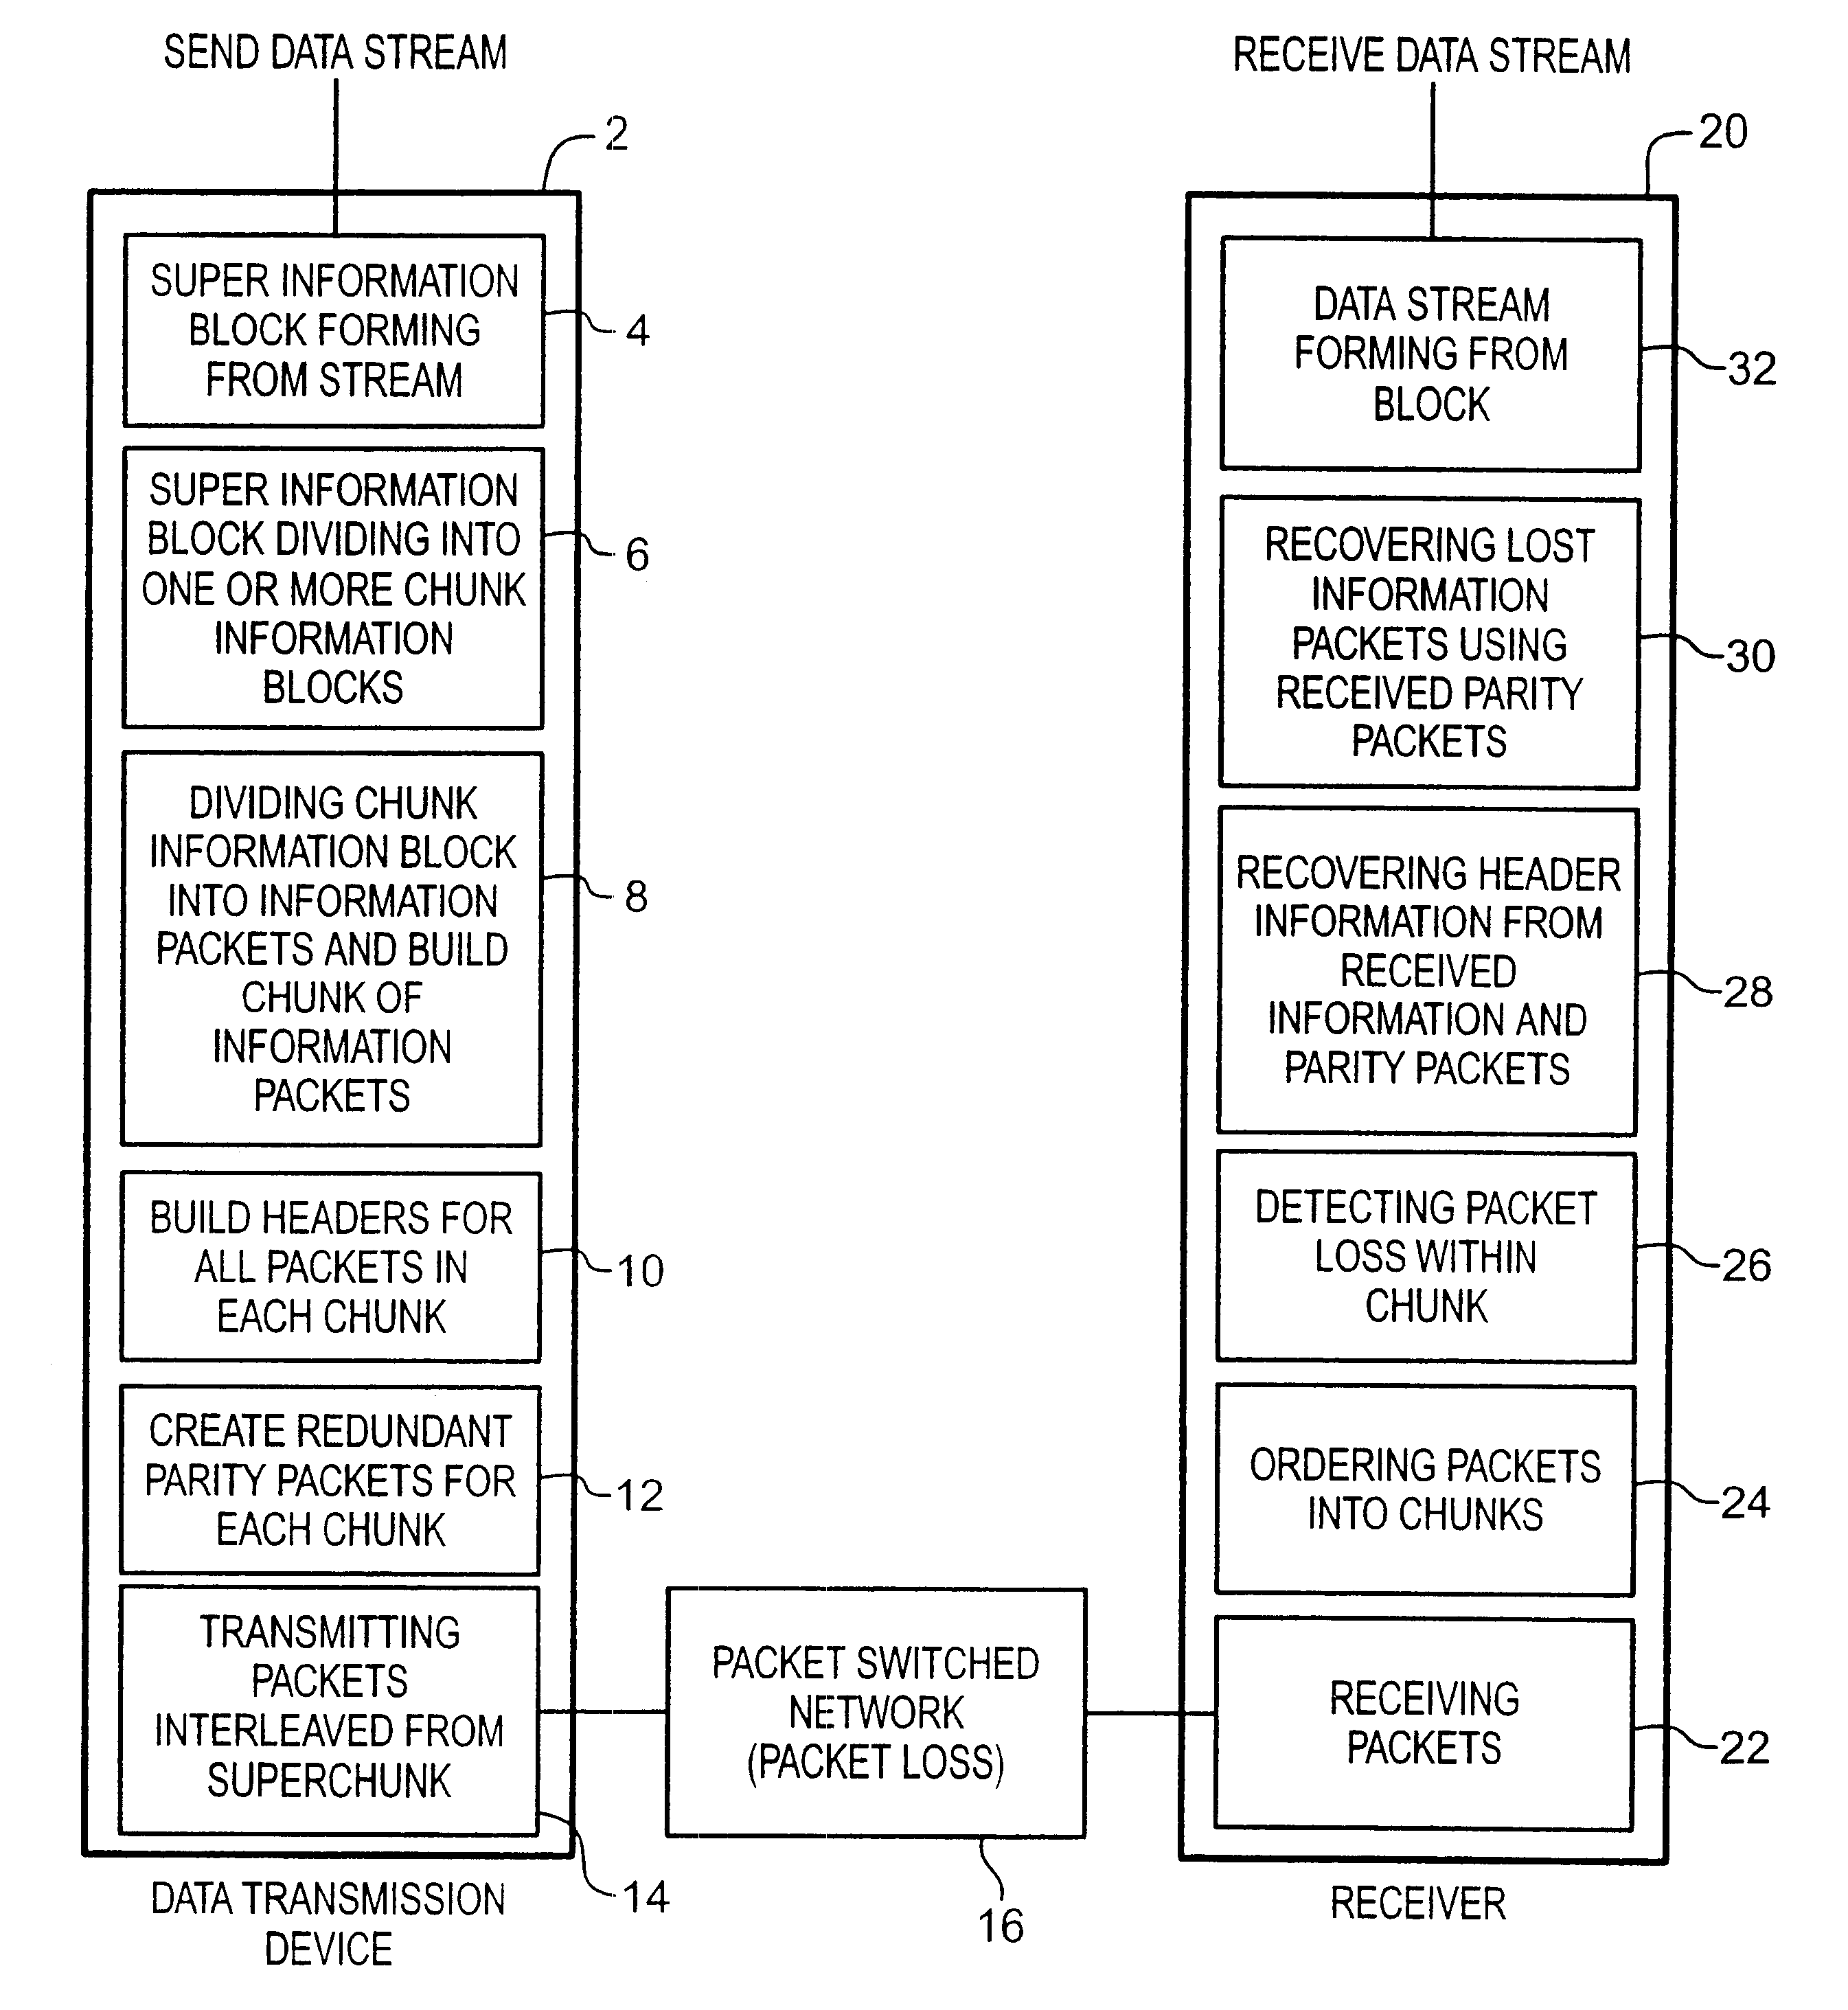 System for recovering lost information in a data stream by means of parity packets